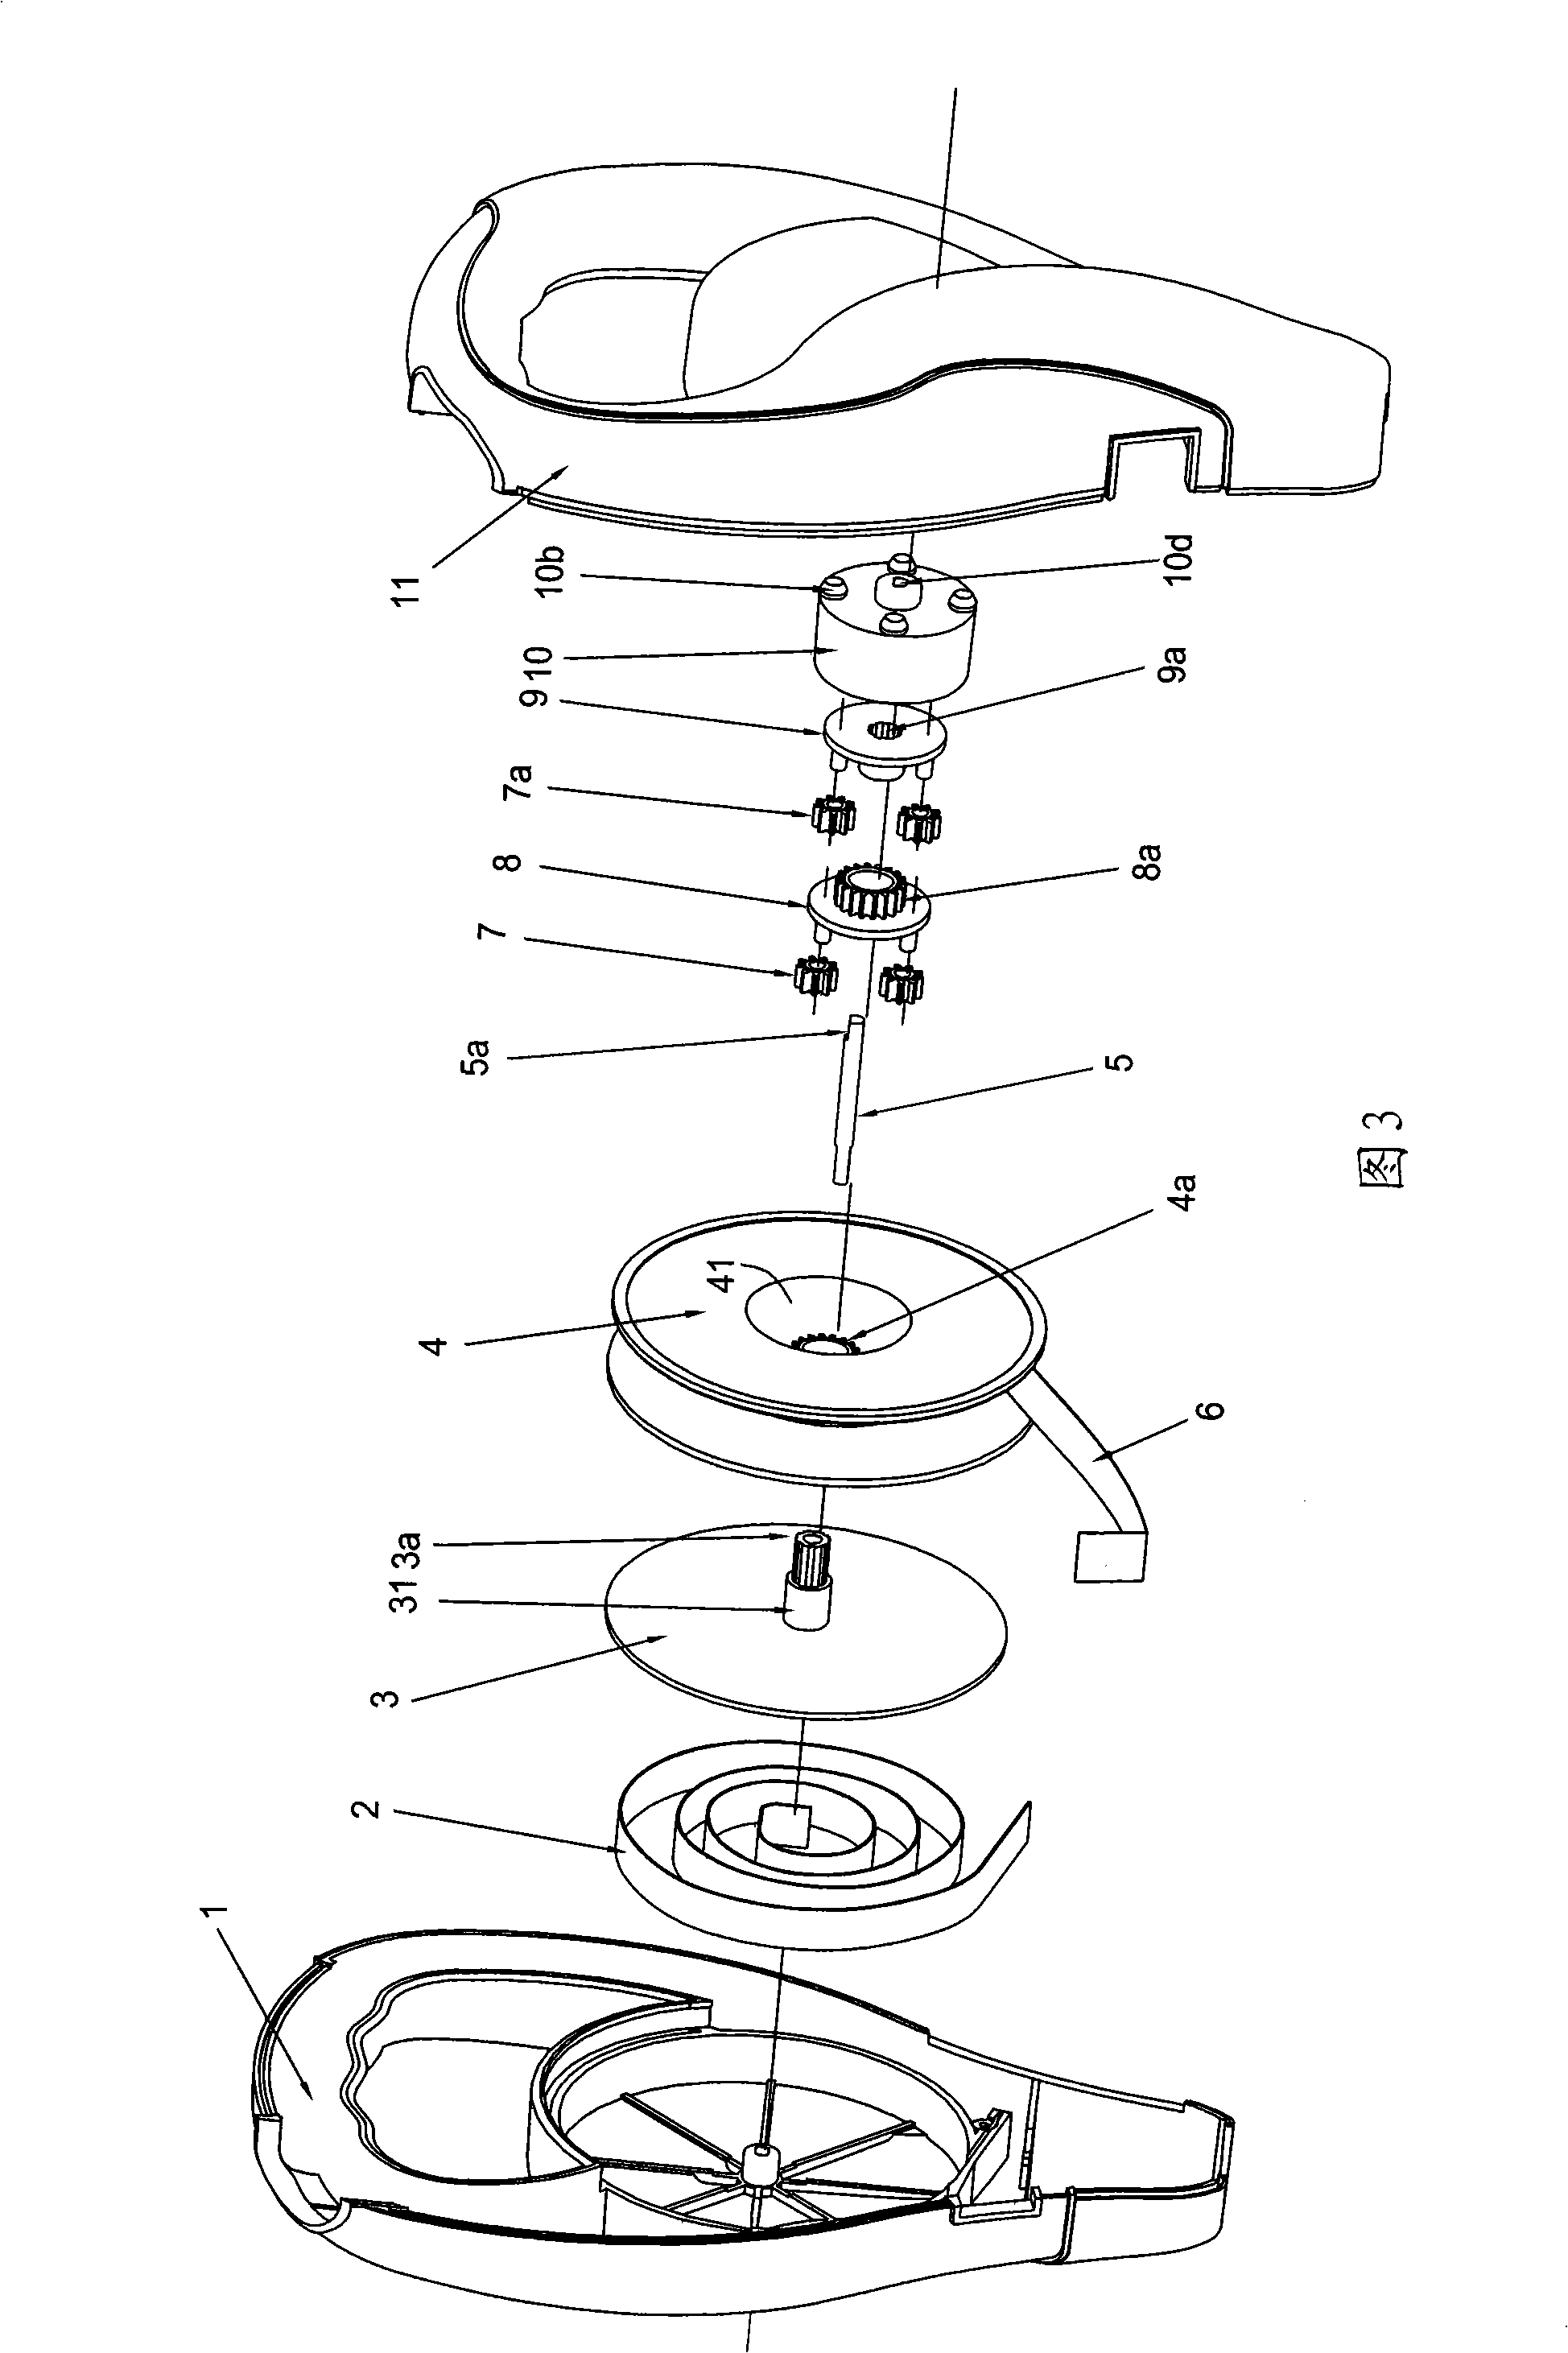 Tape measure and driving mechanism thereof